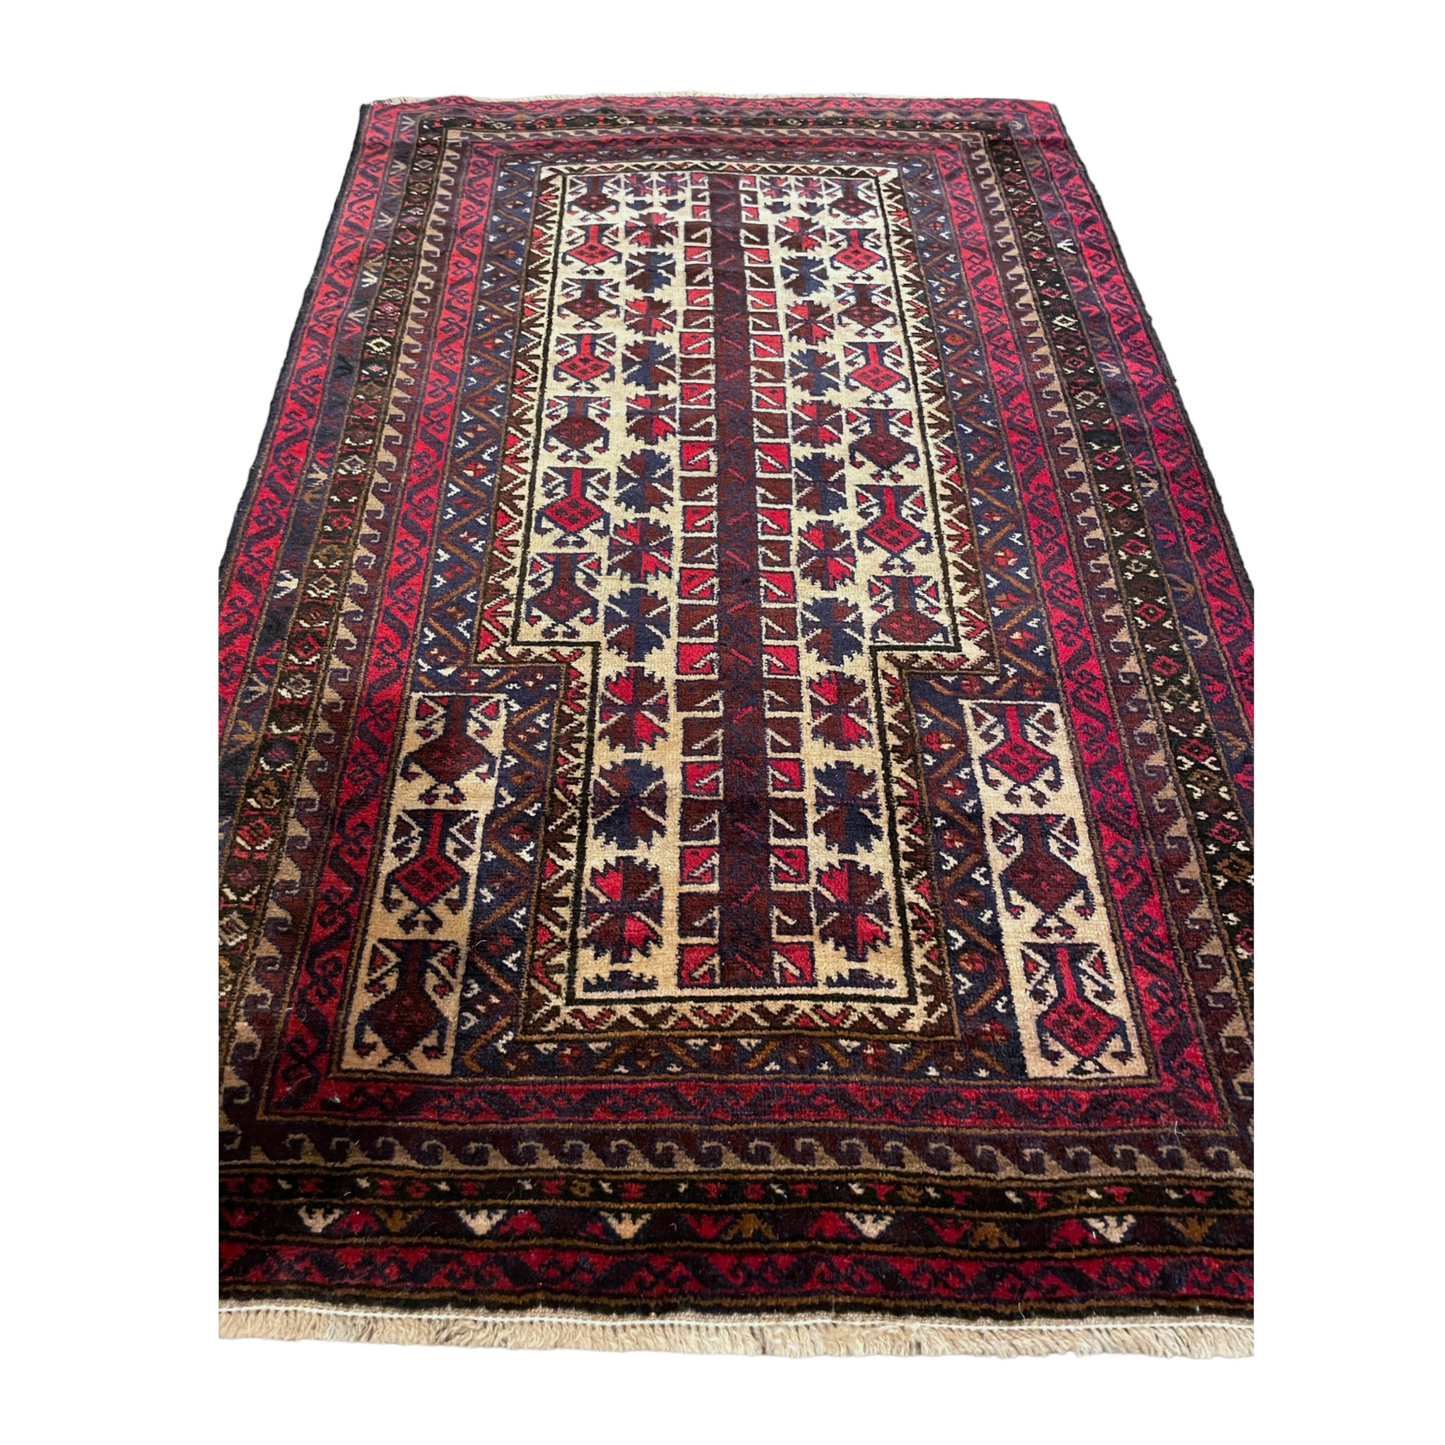 The Yaqin rug is a traditional, one-of-a-kind handwoven Afghan Baluch rug.   